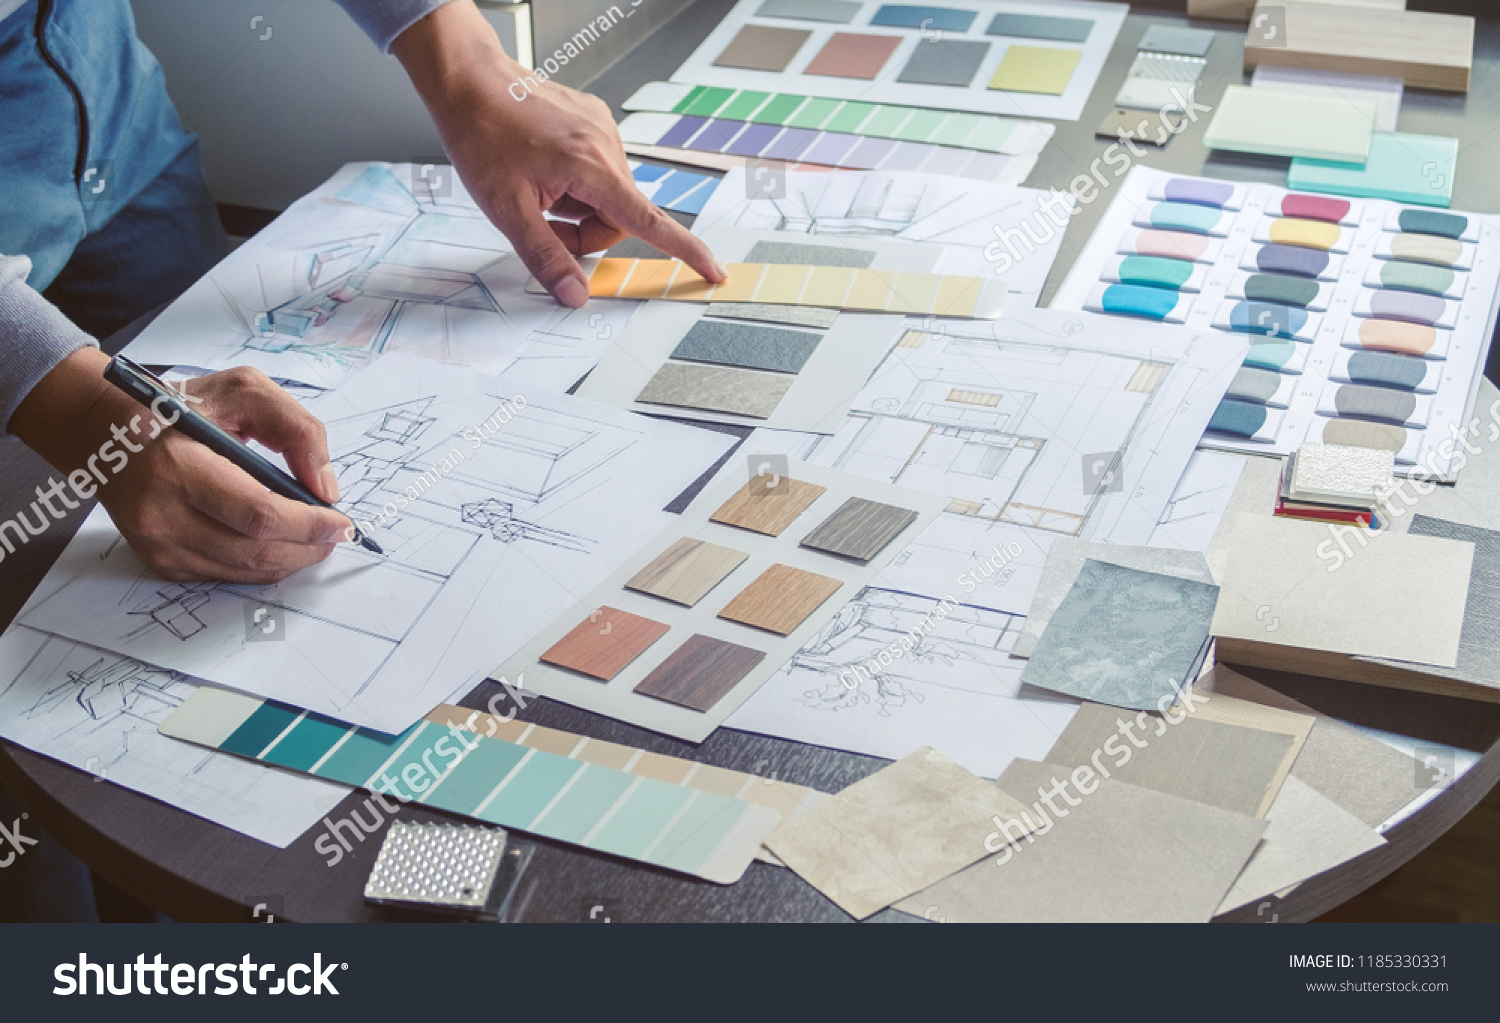 71,574 Home selection Images, Stock Photos & Vectors | Shutterstock